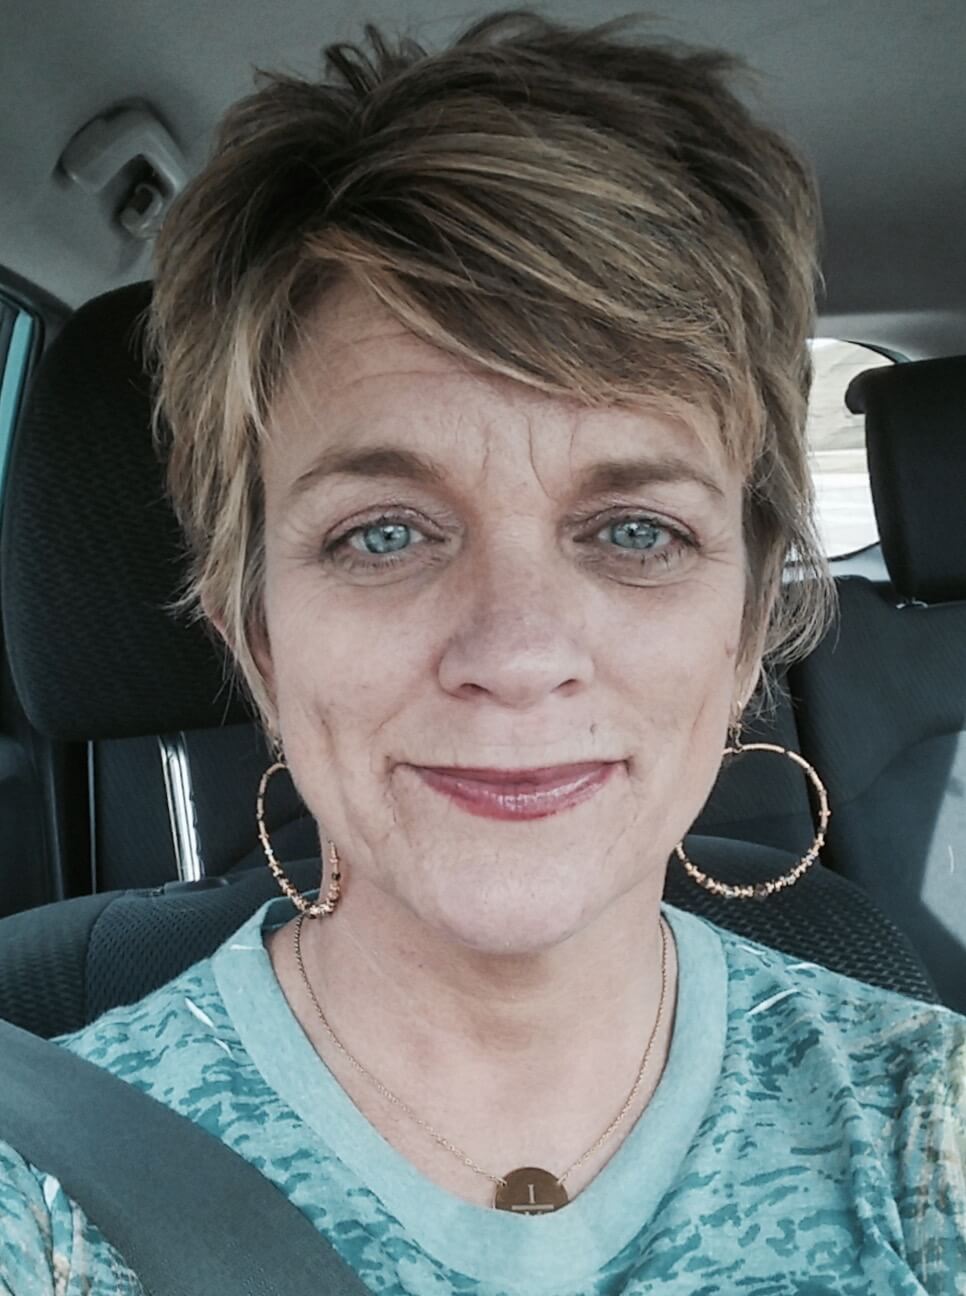 120 days sober looks like this when you are 49